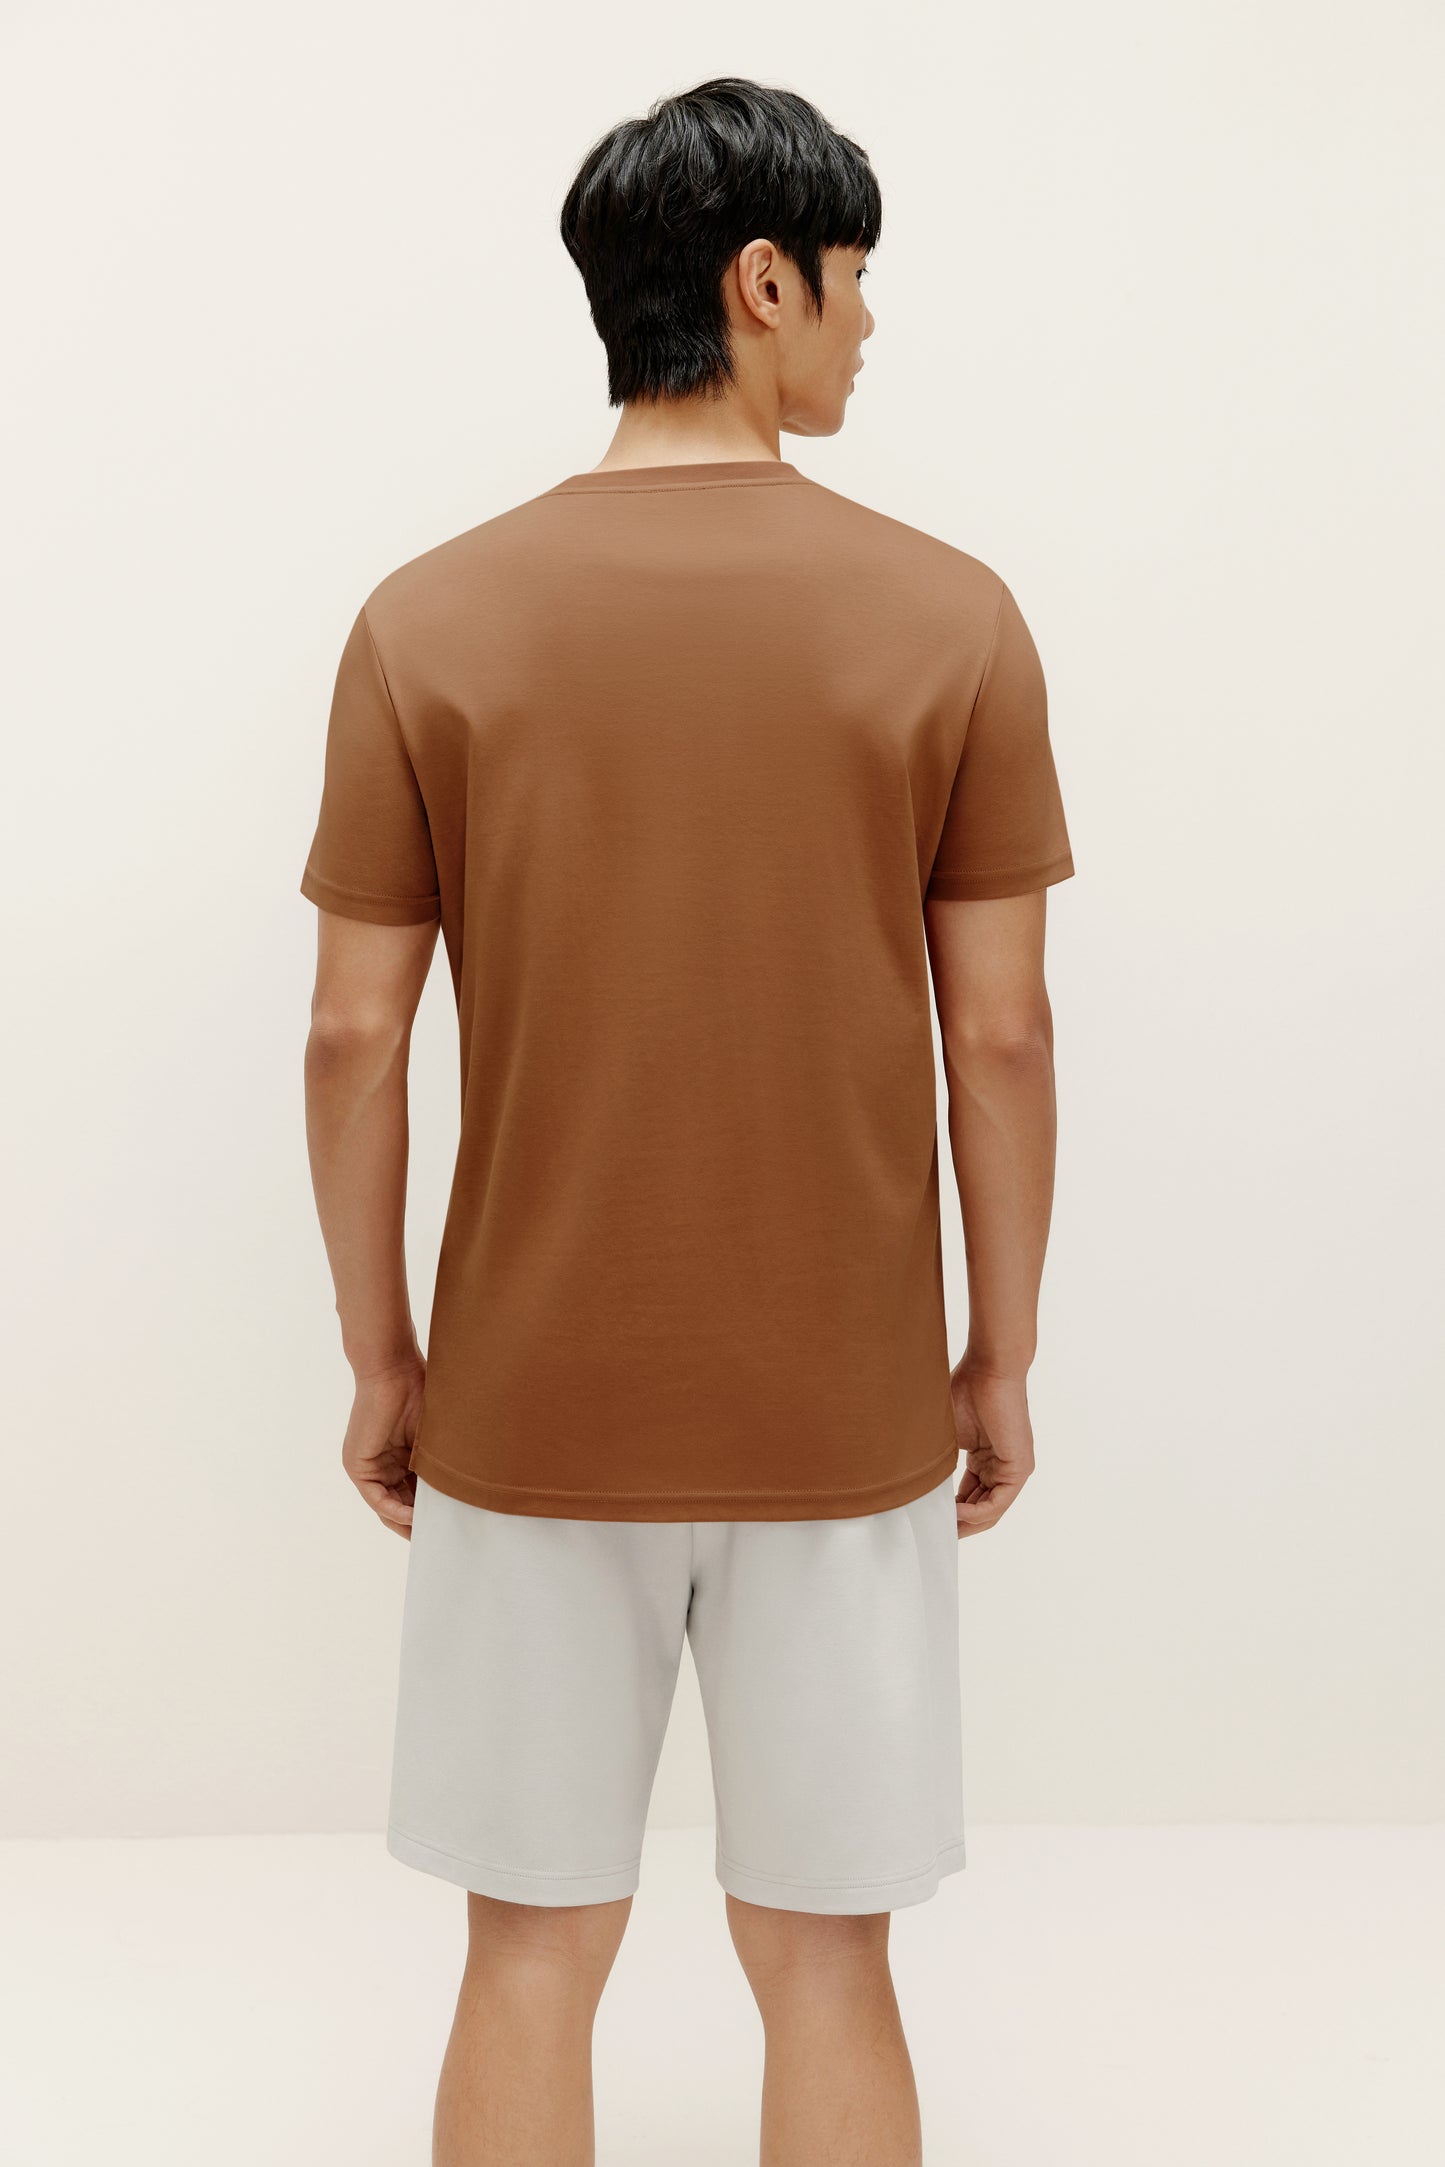 back of a man wearing brown t shirt and white shorts